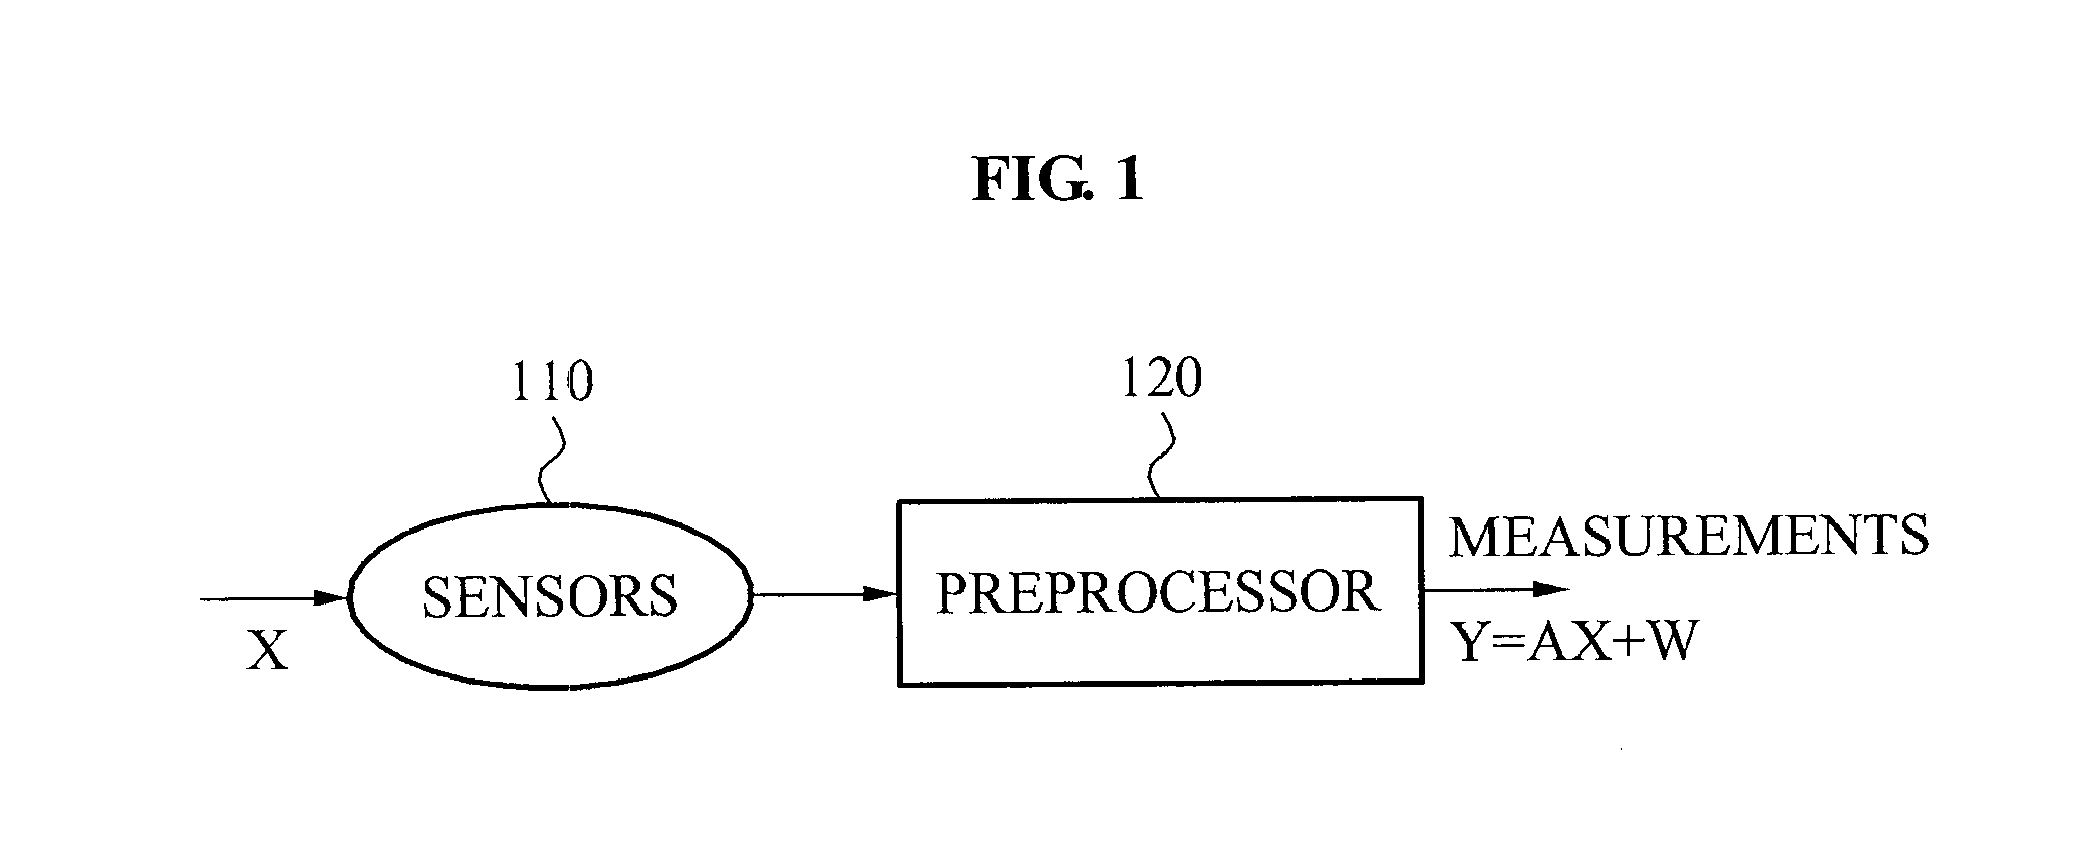 Method and apparatus for compressed sensing with joint sparsity